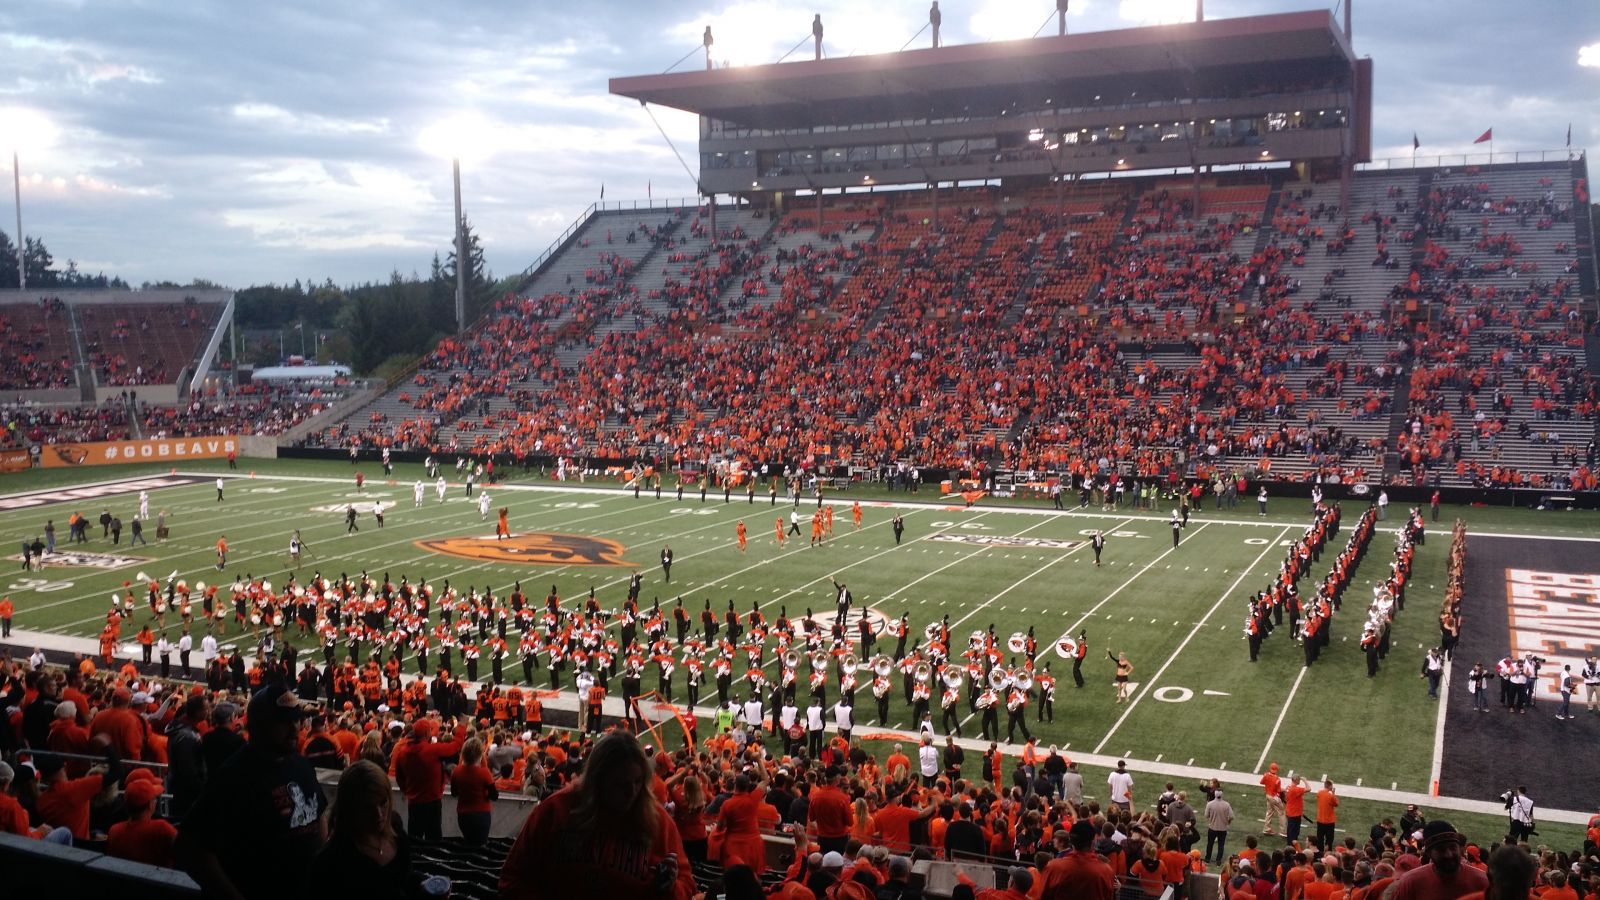 Section 113 at Reser Stadium - RateYourSeats.com